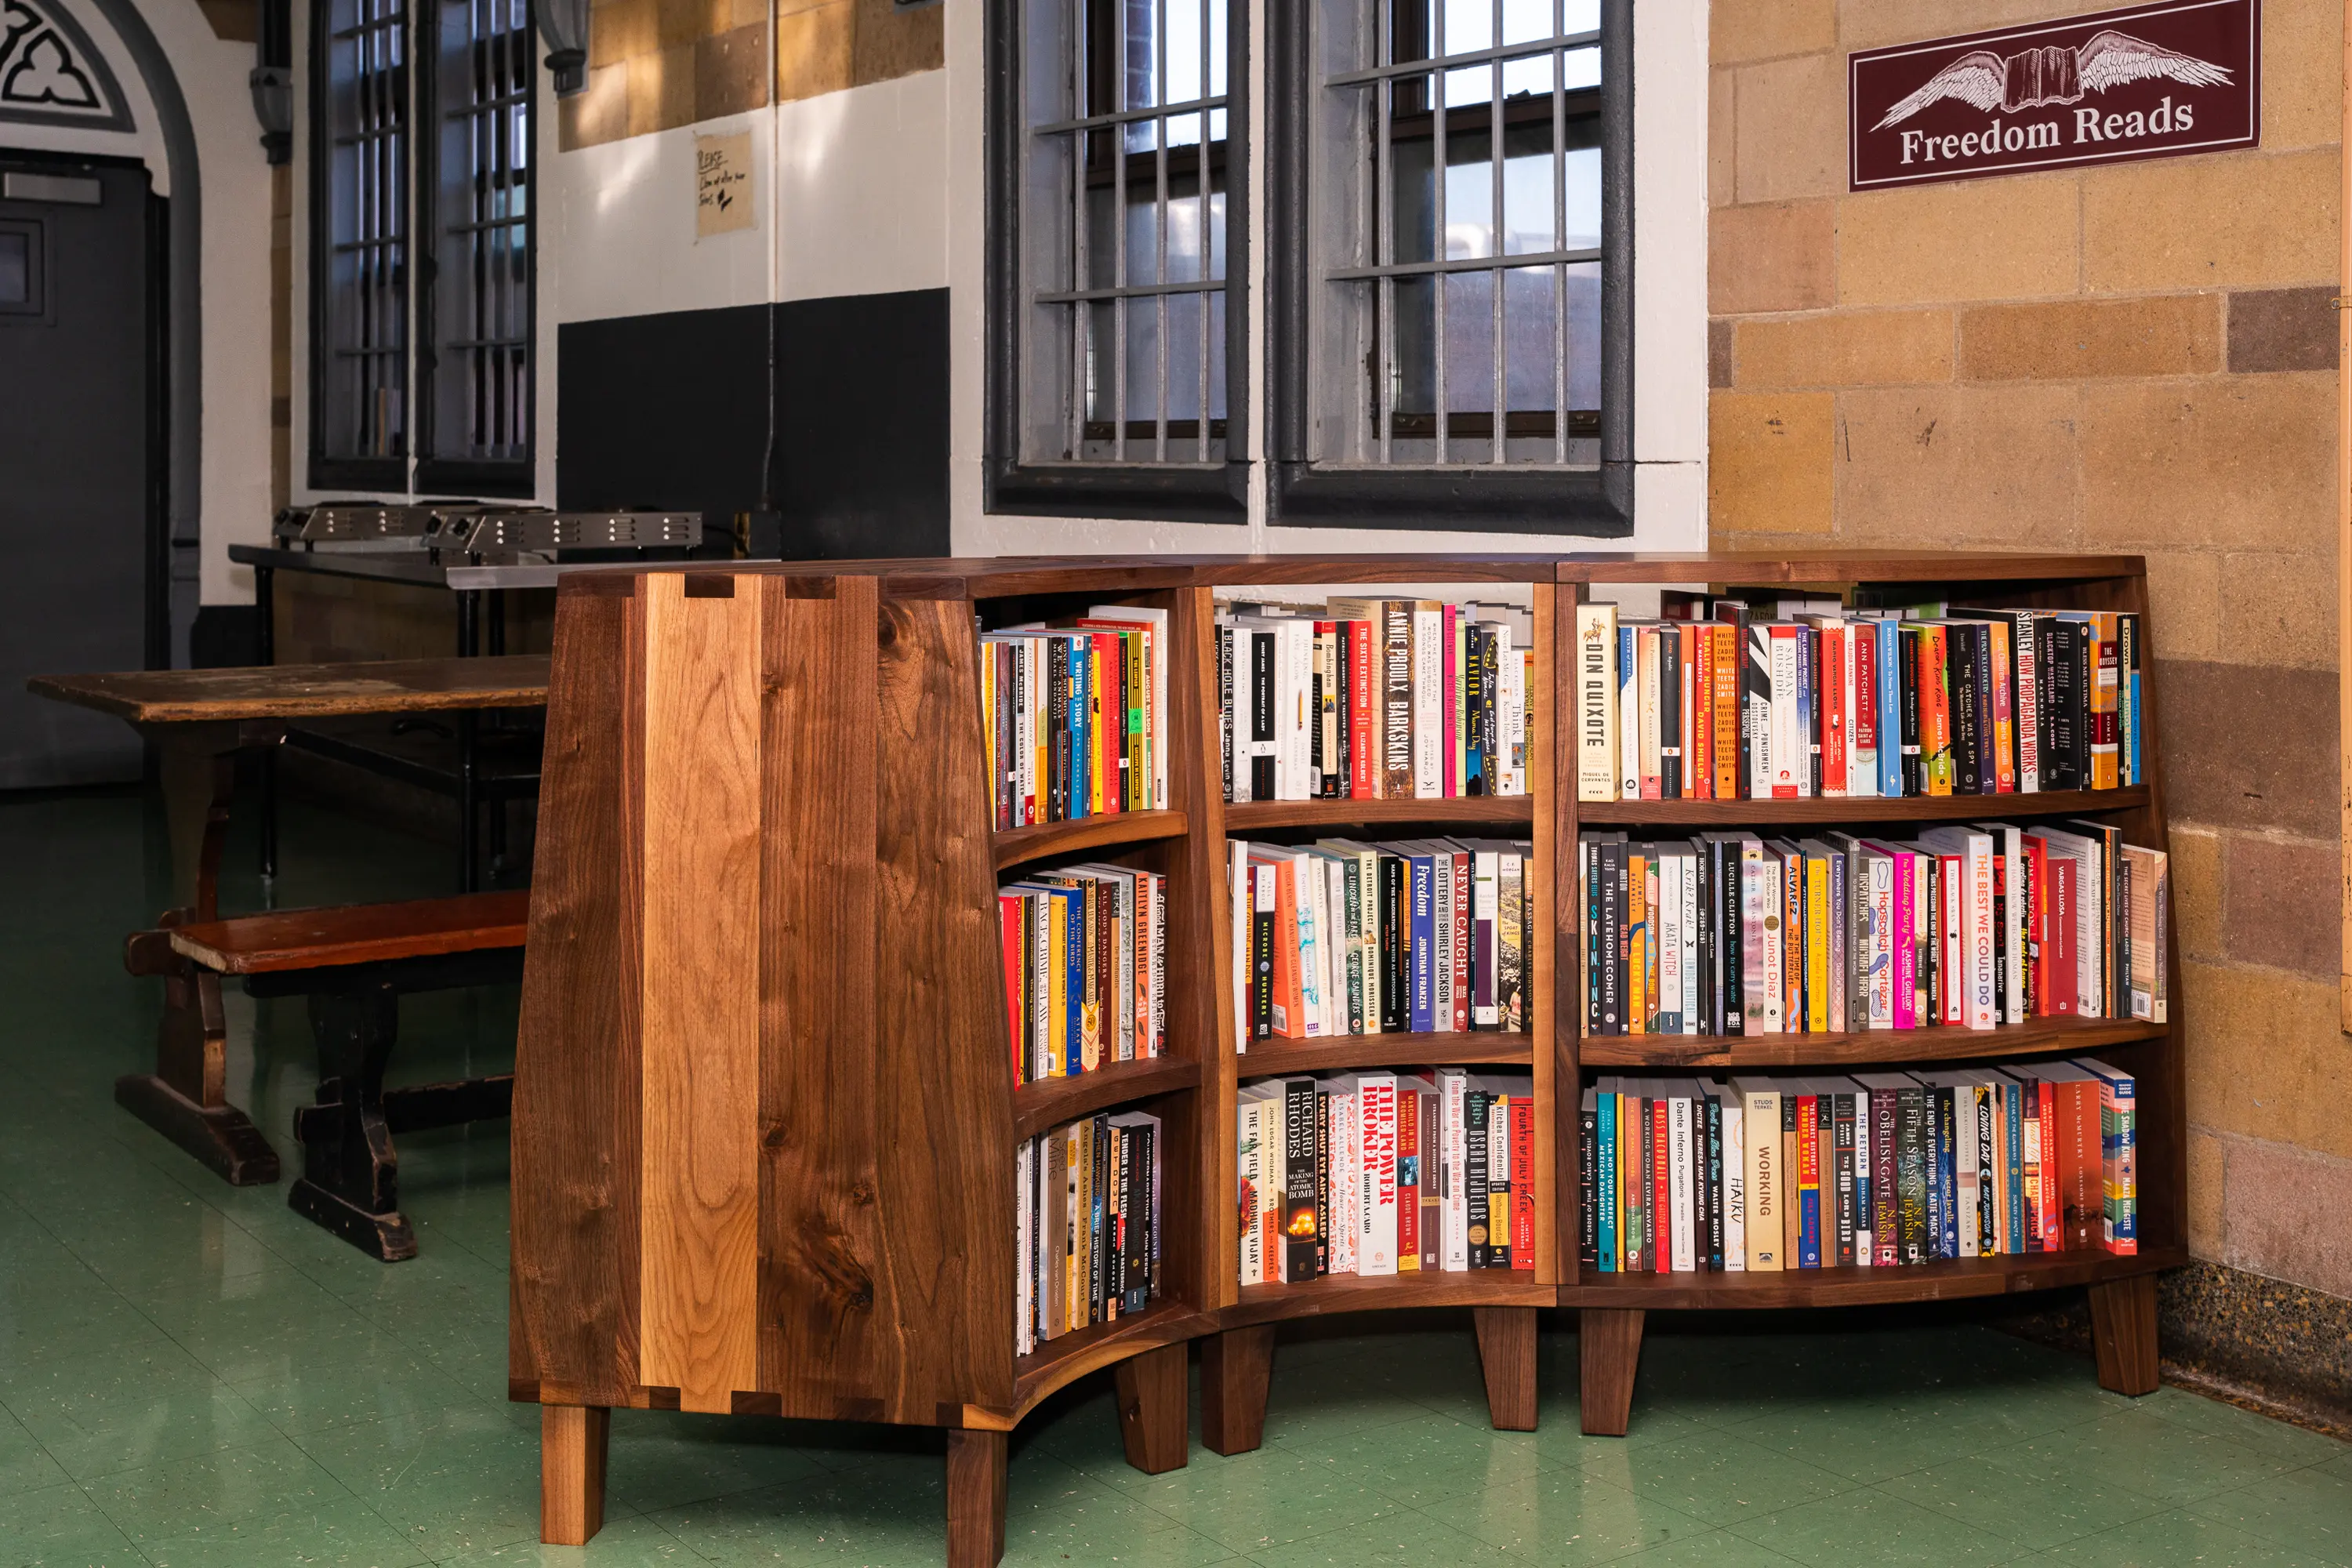 A Freedom Library at Woodbourne Correctional Facility in New York.